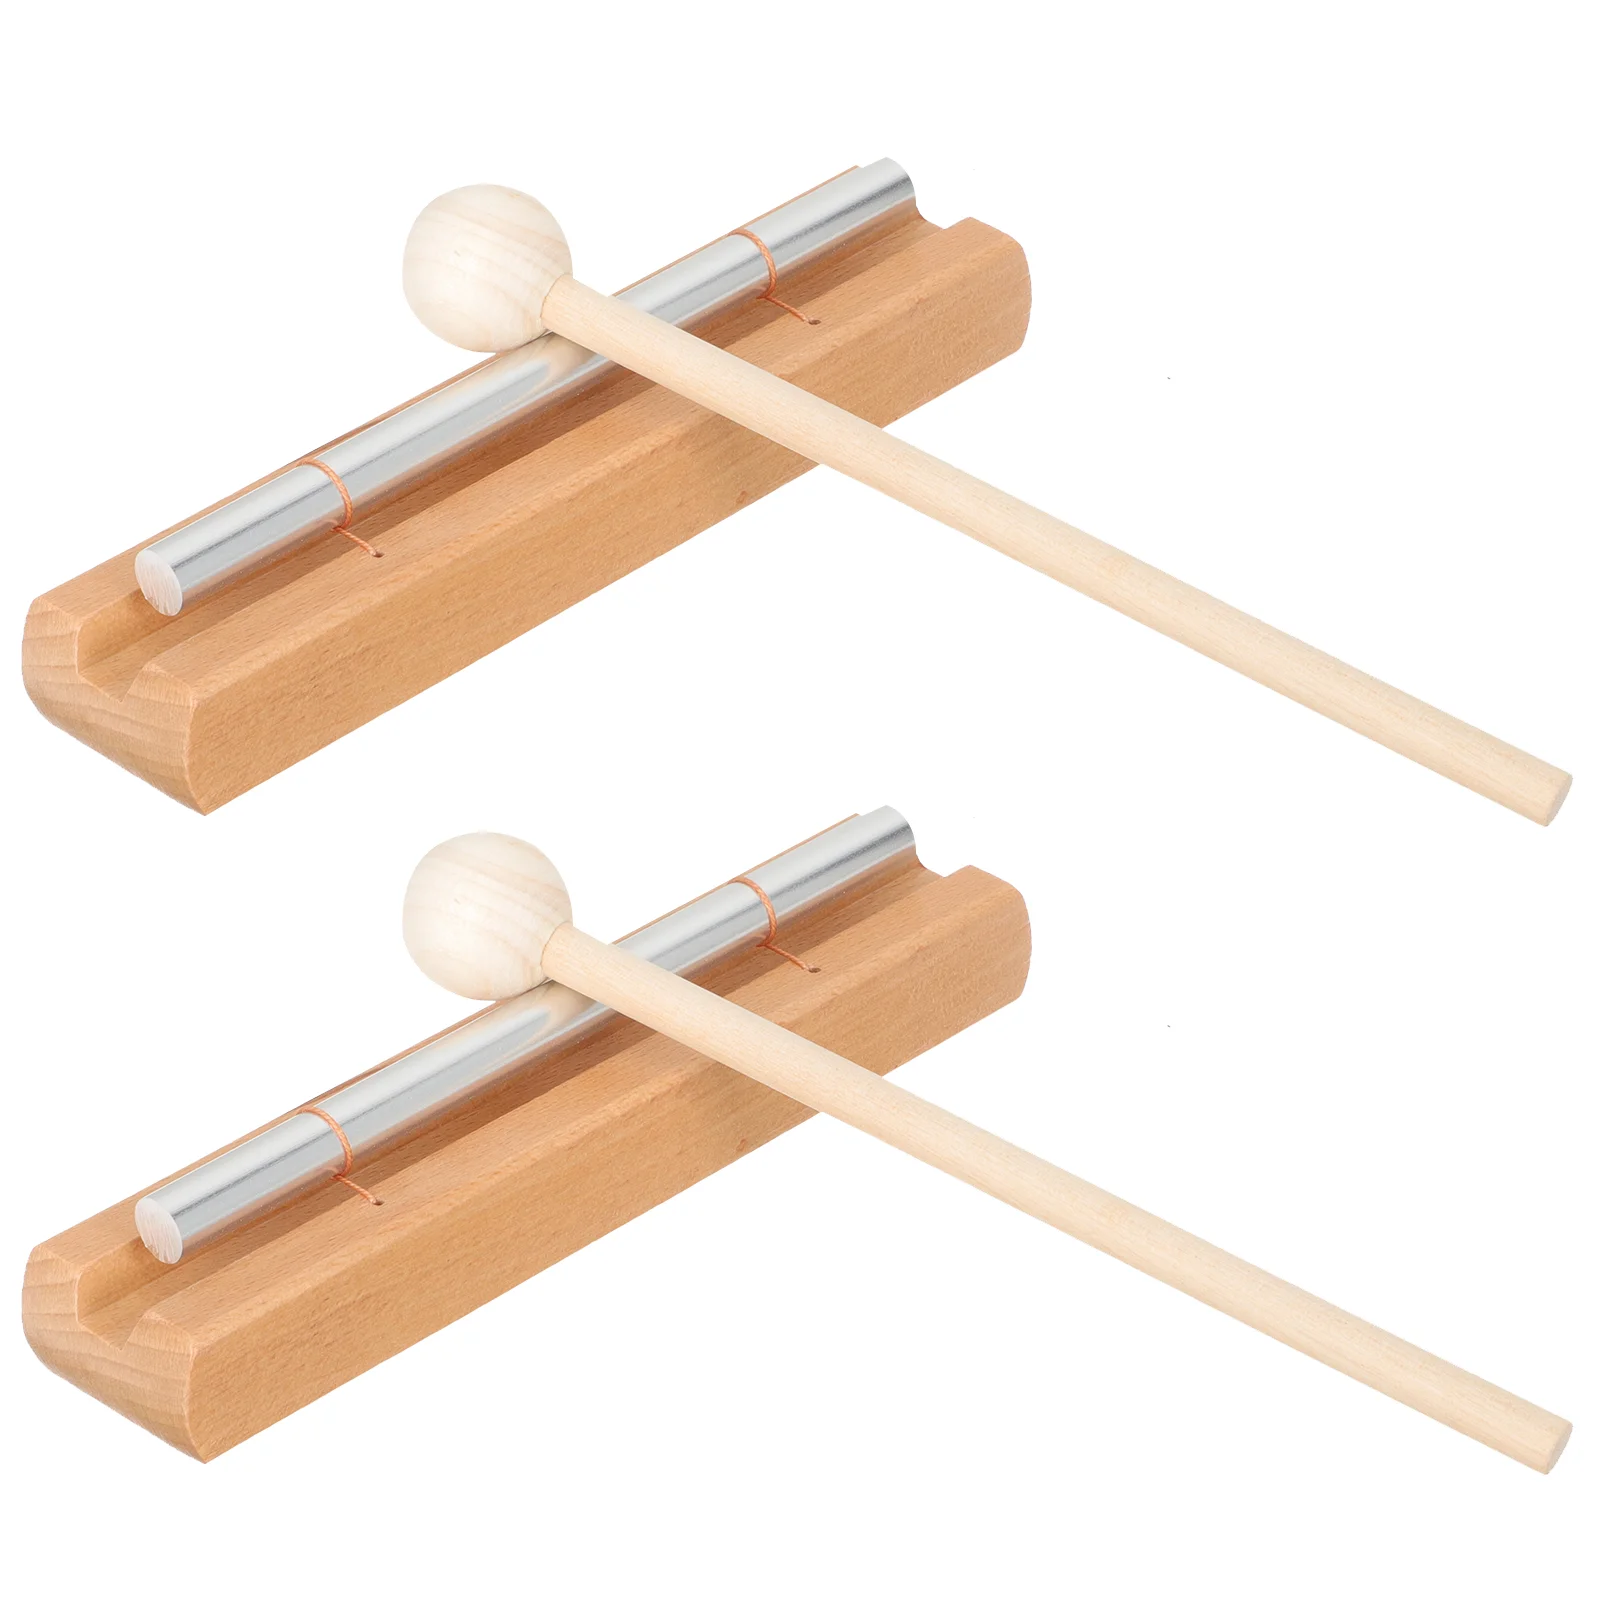 

2 Set of Percussion Hand Bell Meditation Chimes Teacher Reminder Chimes Music Instrument with Mallet